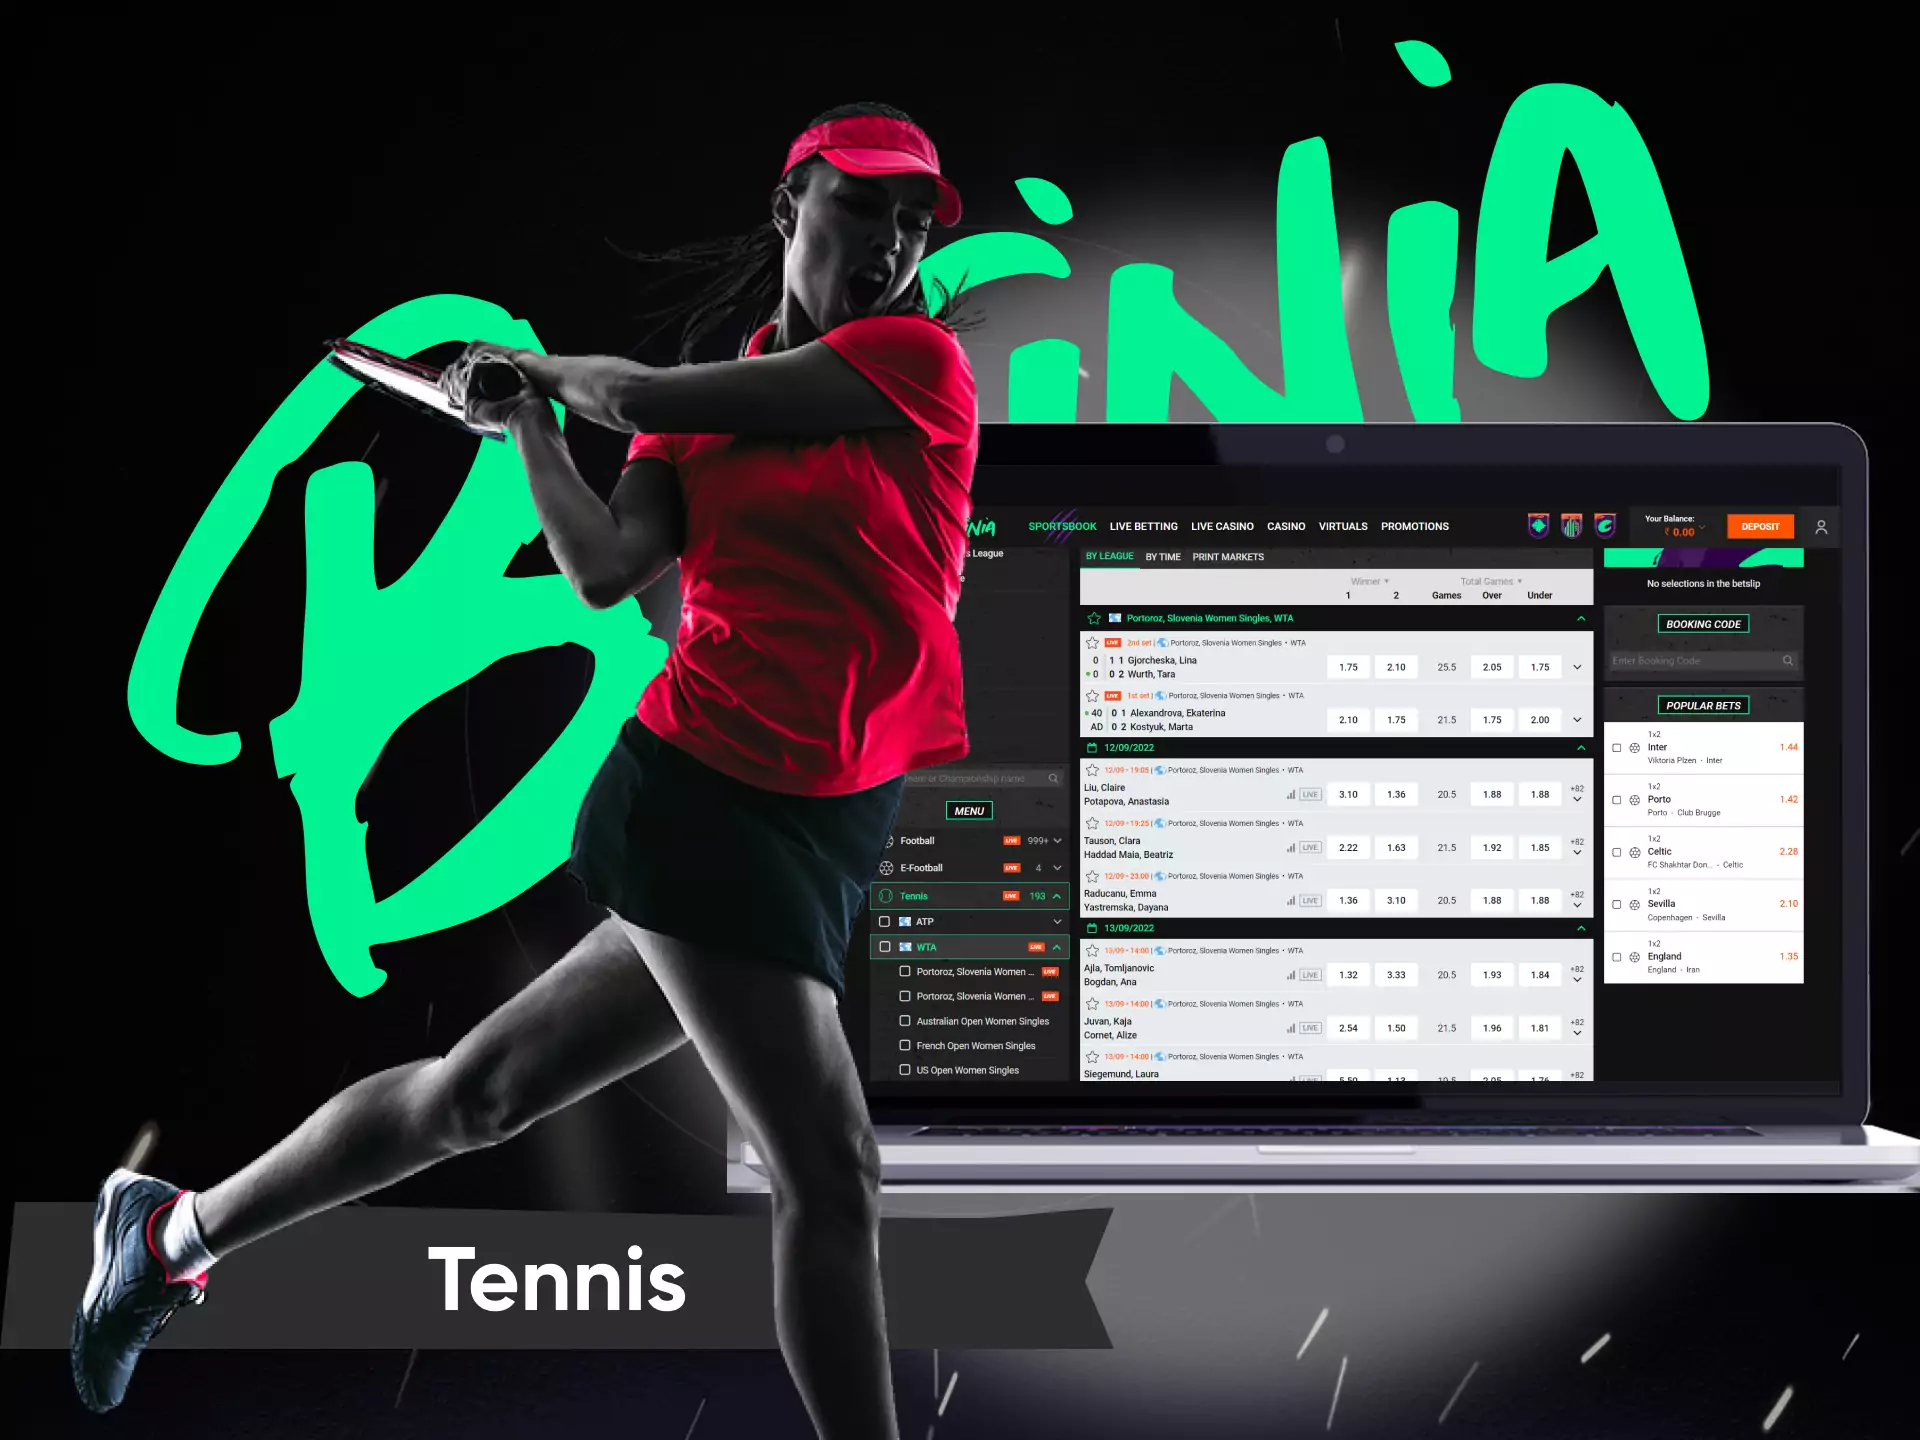 Betting on tennis events is also popular on the Betinia website.